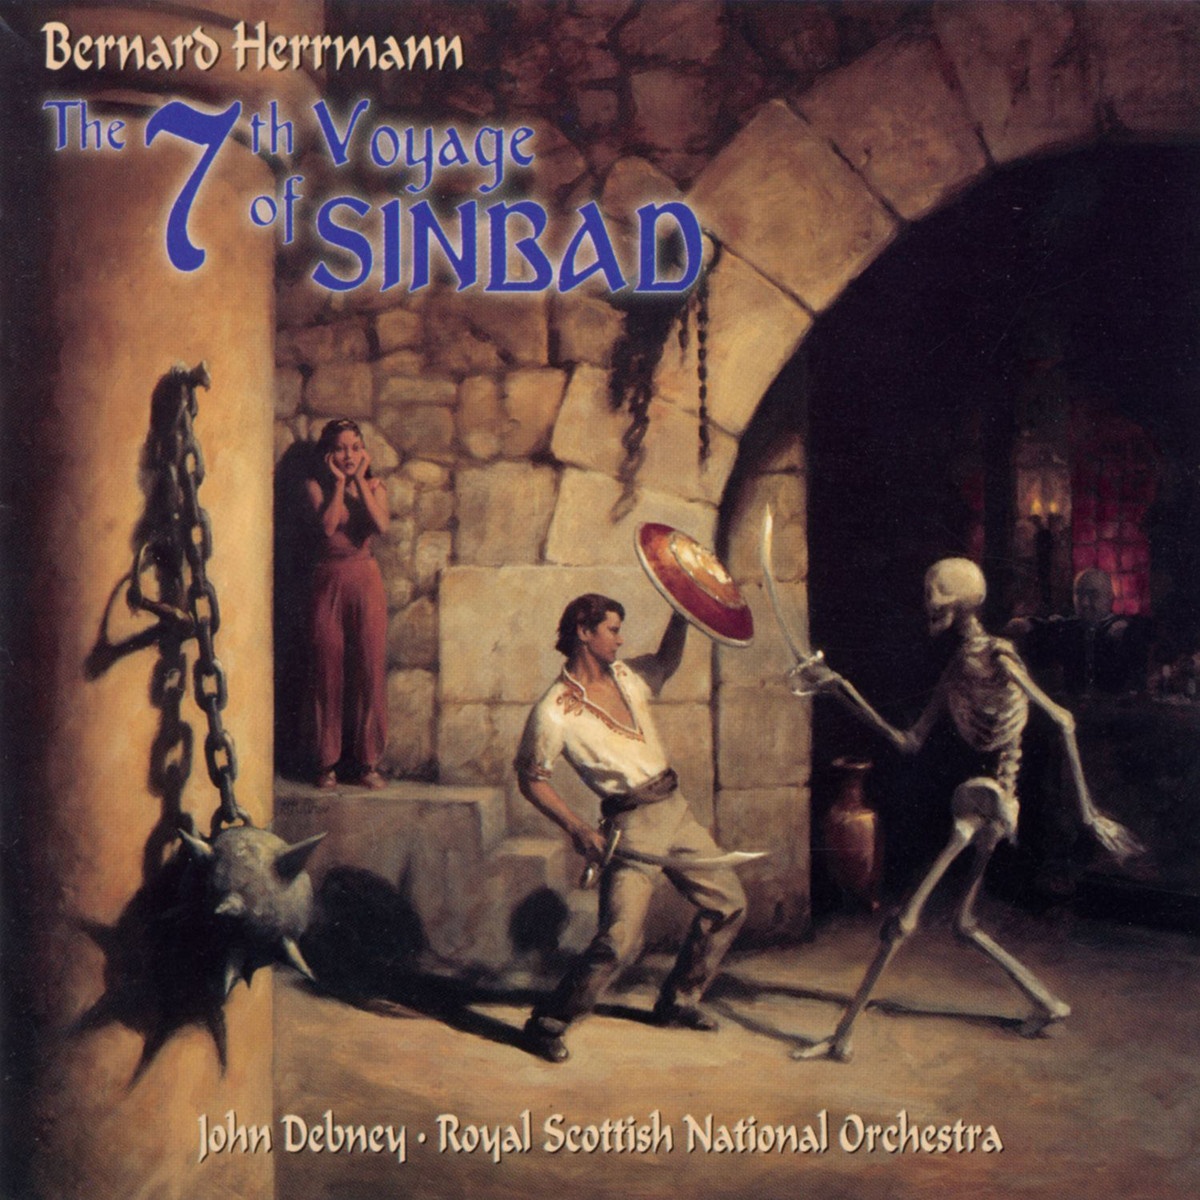 The 7th Voyage of Sinbad (O.S.T Recording)